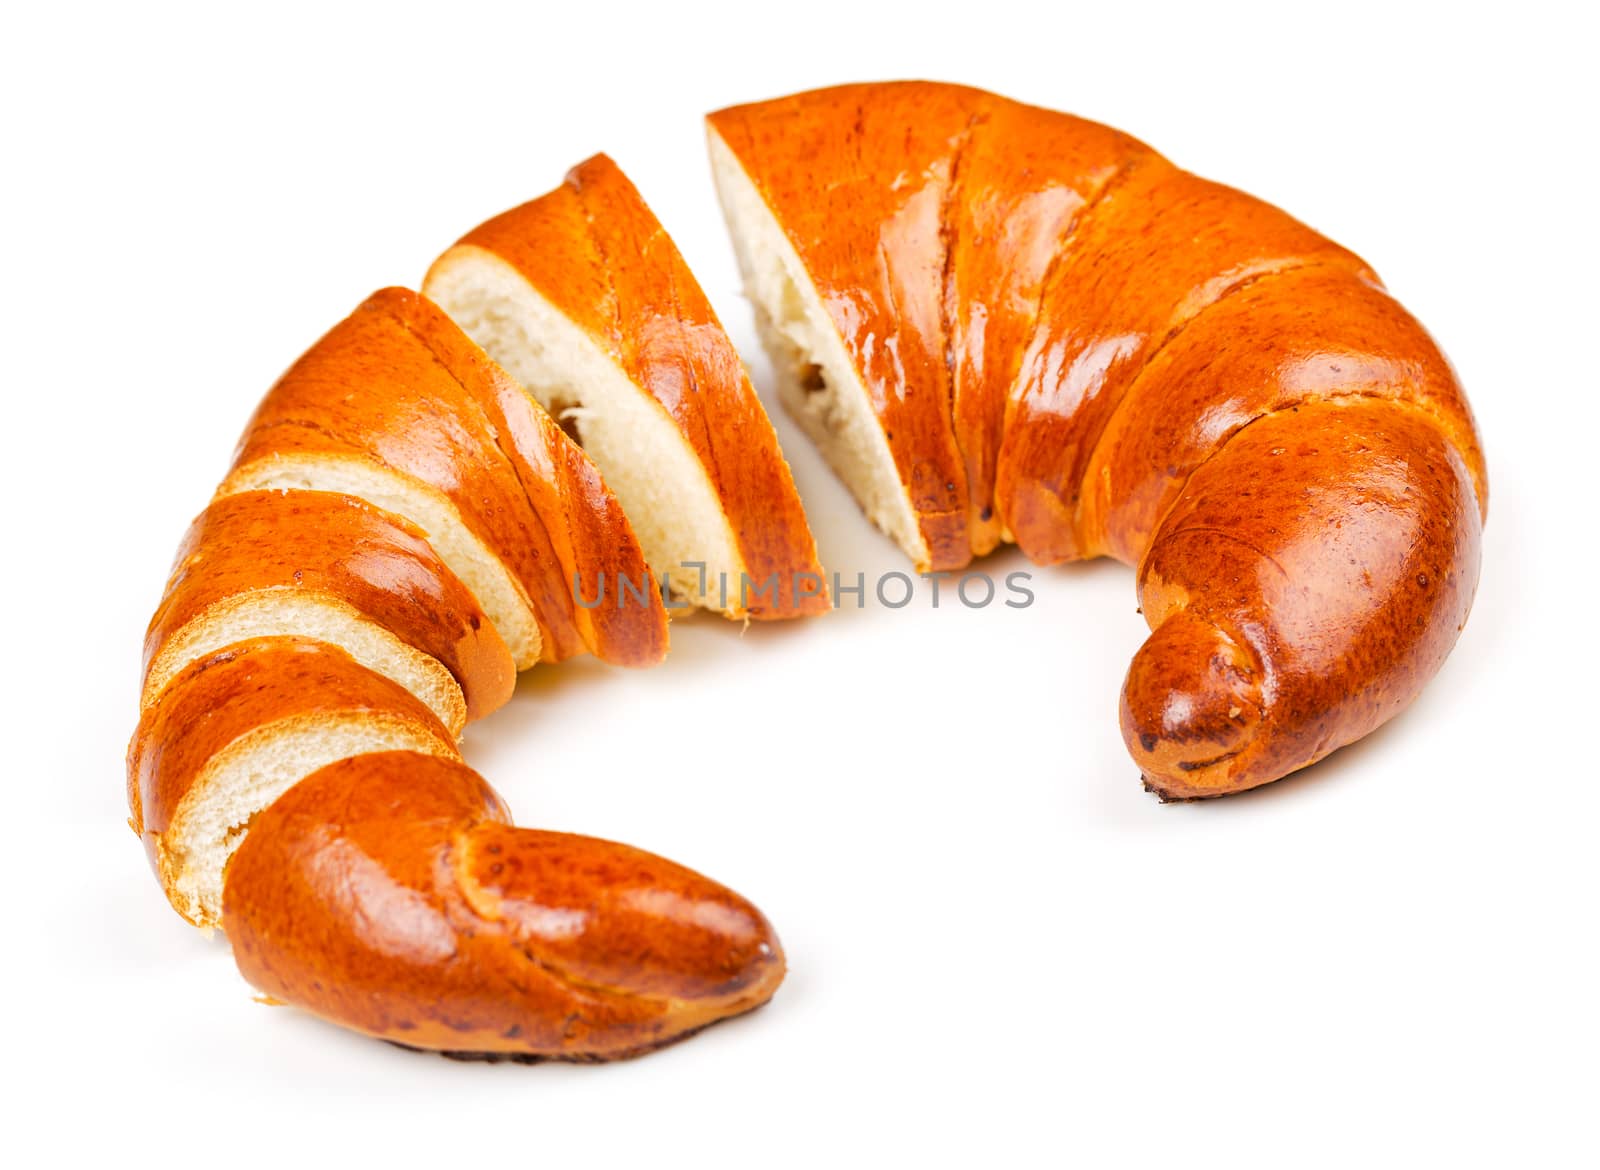 Fresh and tasty bagel with jam sliced pieces over white background